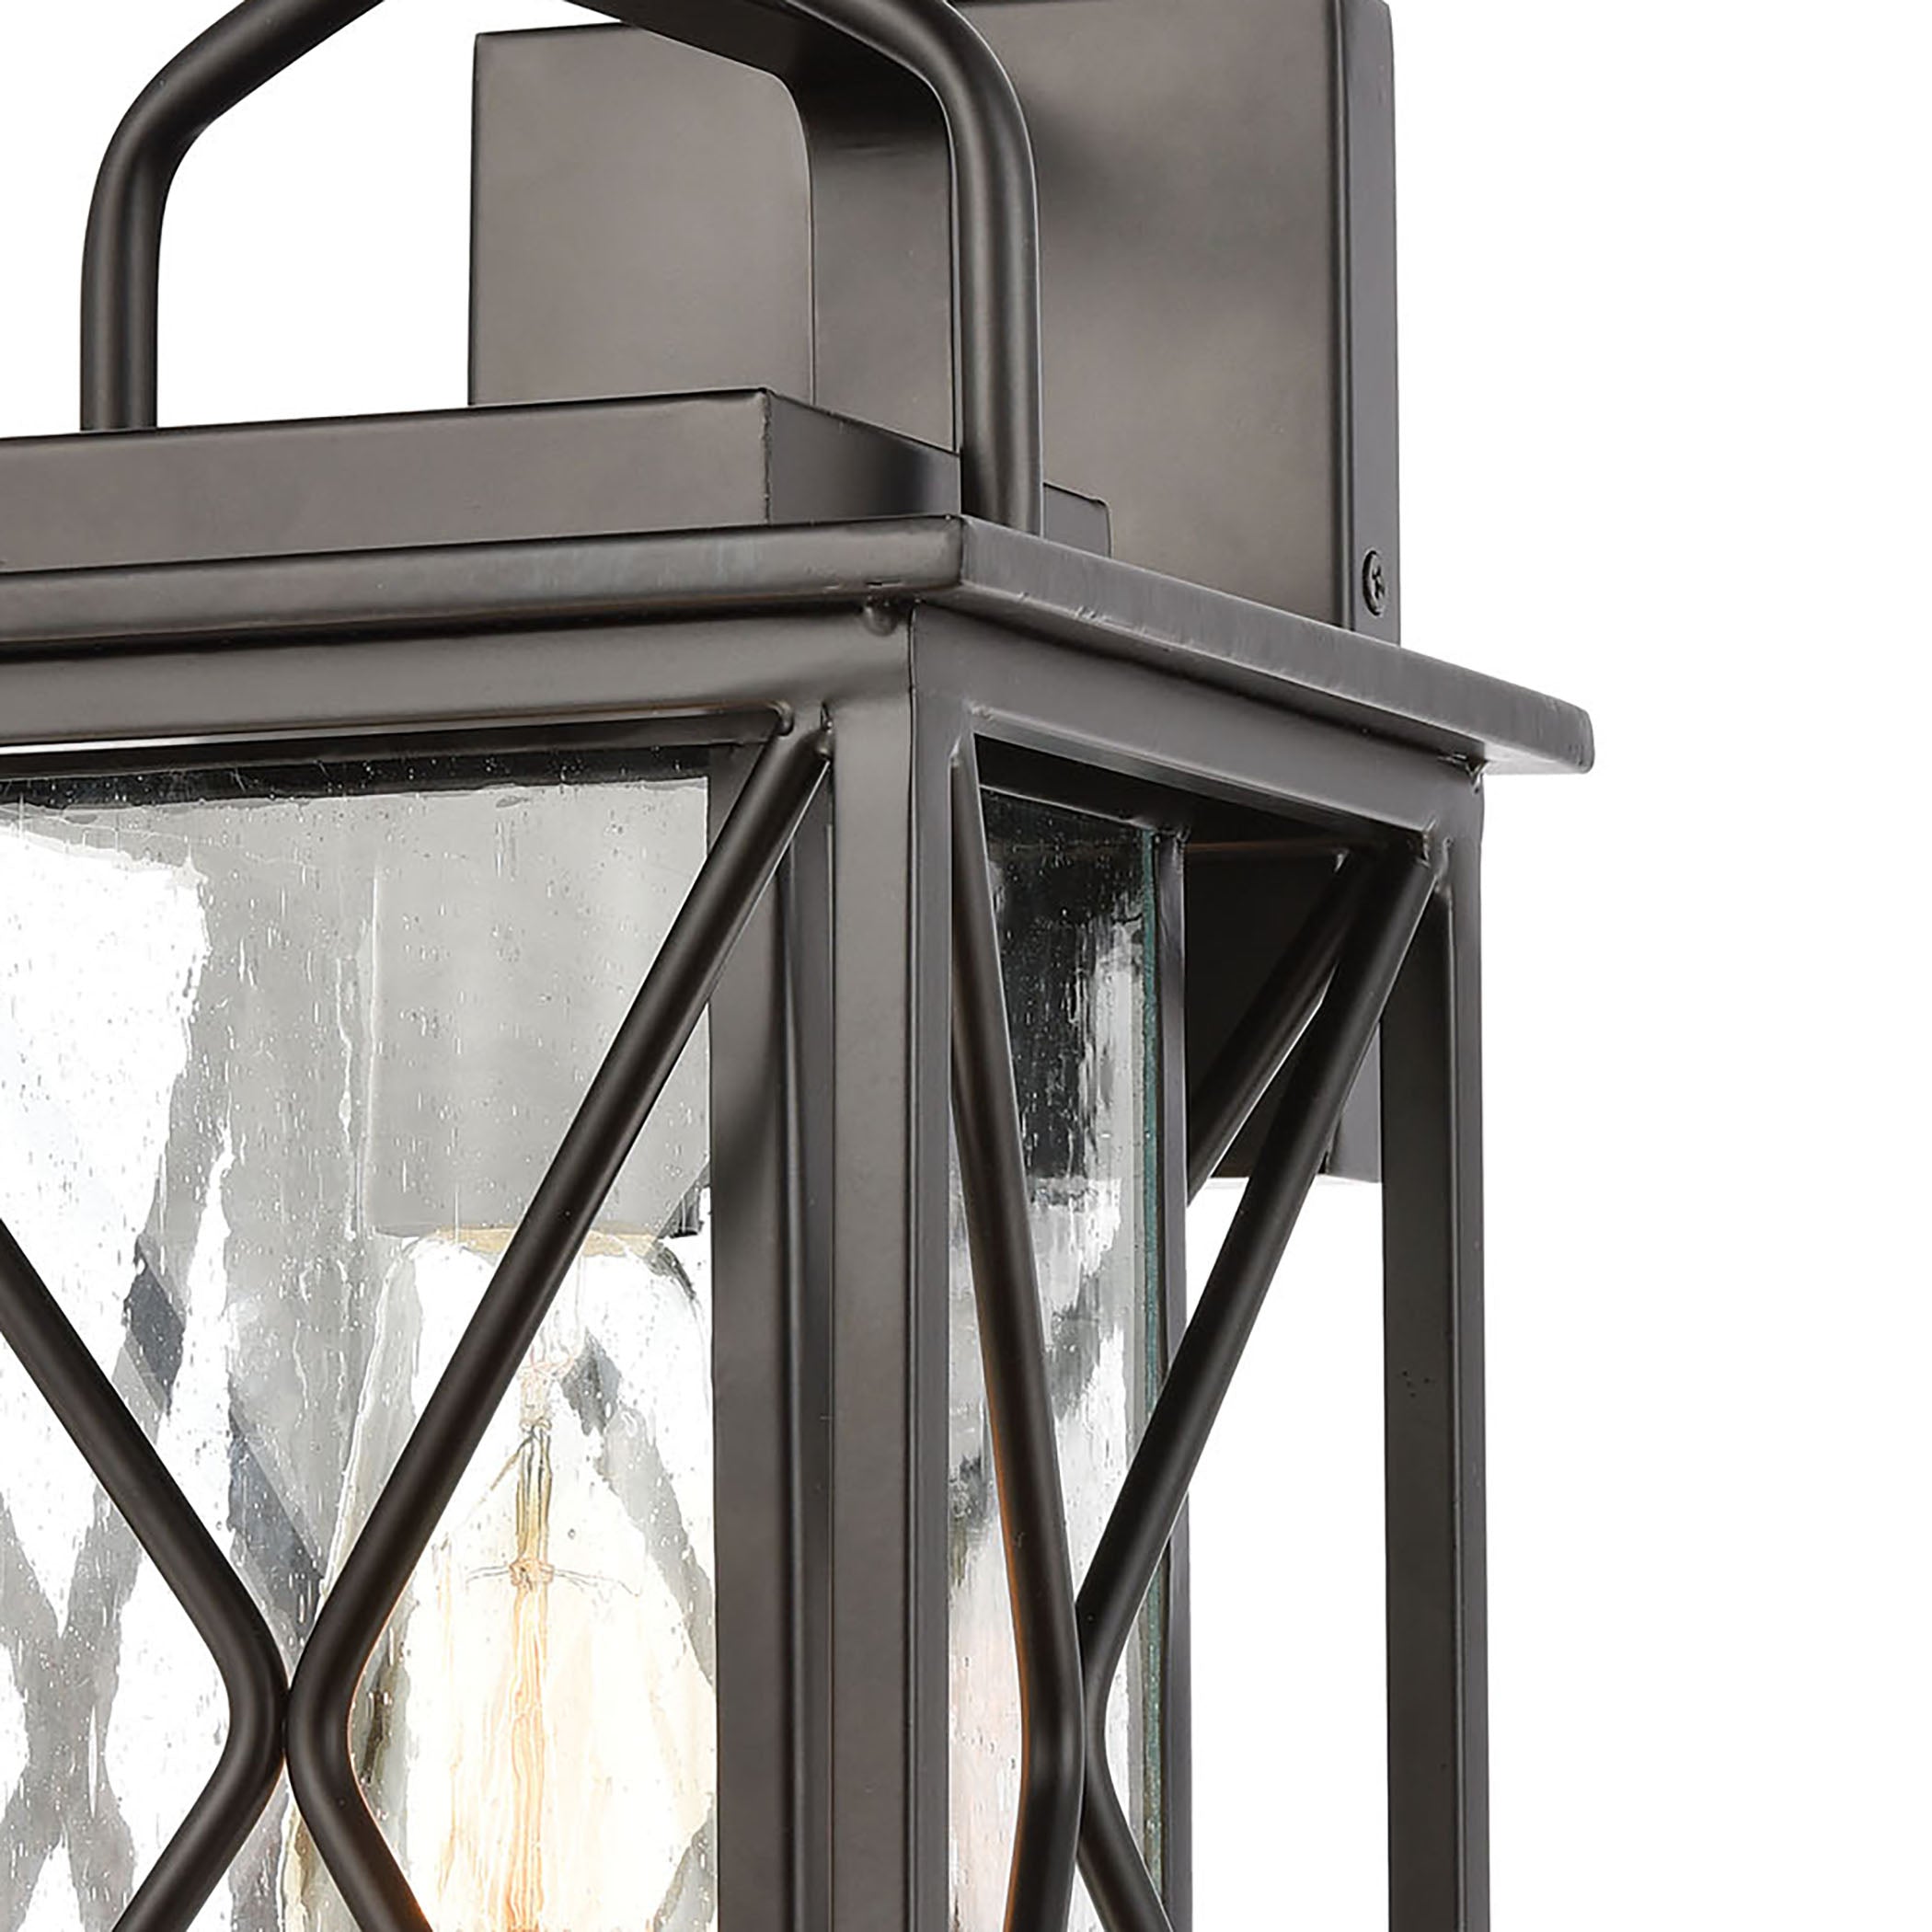 ELK Lighting 46750/1 Carriage Light 1-Light Sconce in Matte Black with Seedy Glass